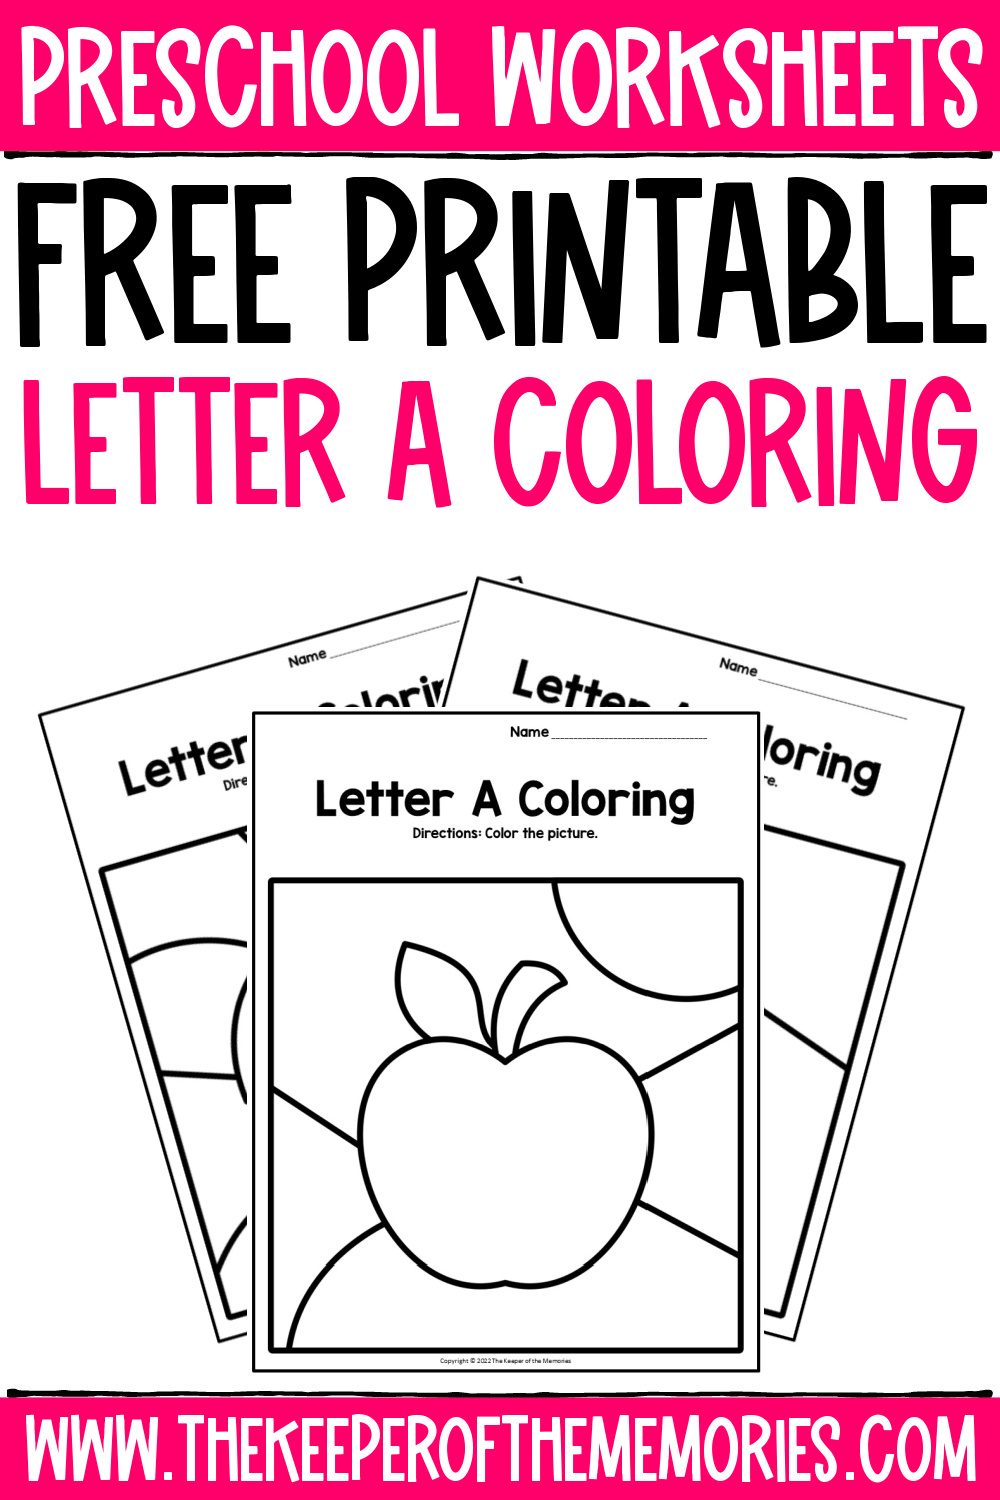 Free printable letter a coloring pages